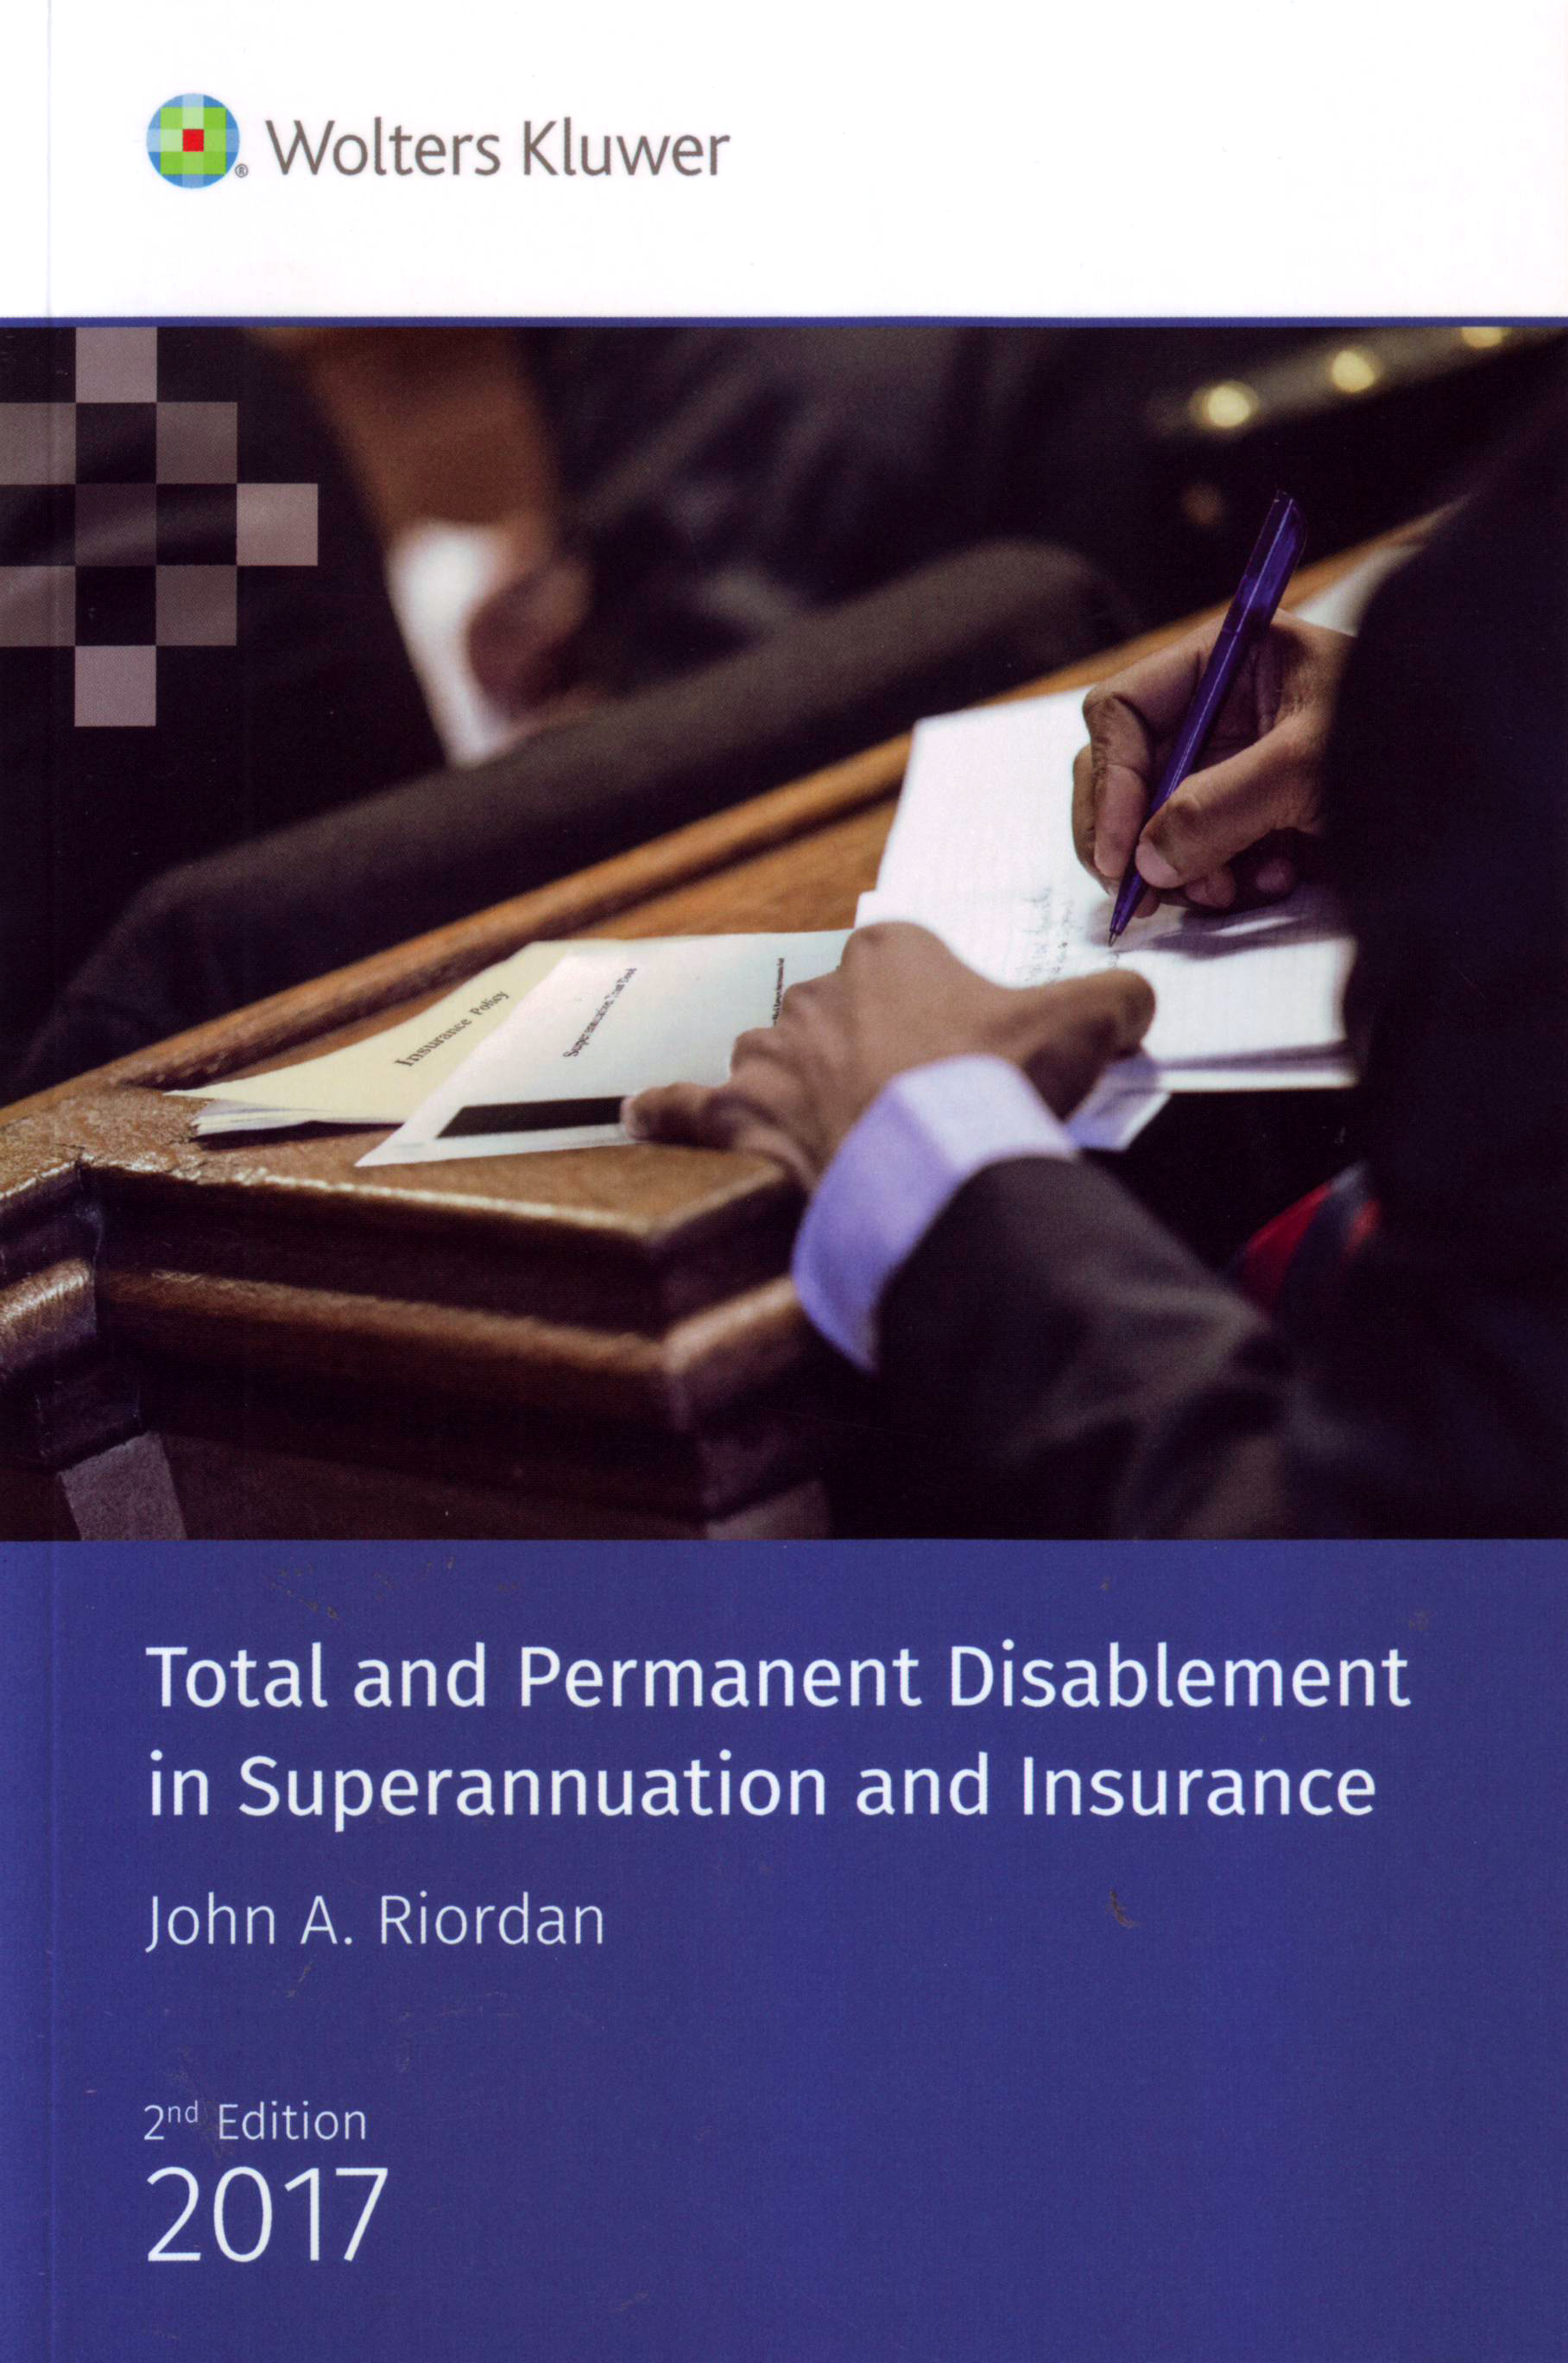 Total and Permanent Disablement in Superannuation and Insura